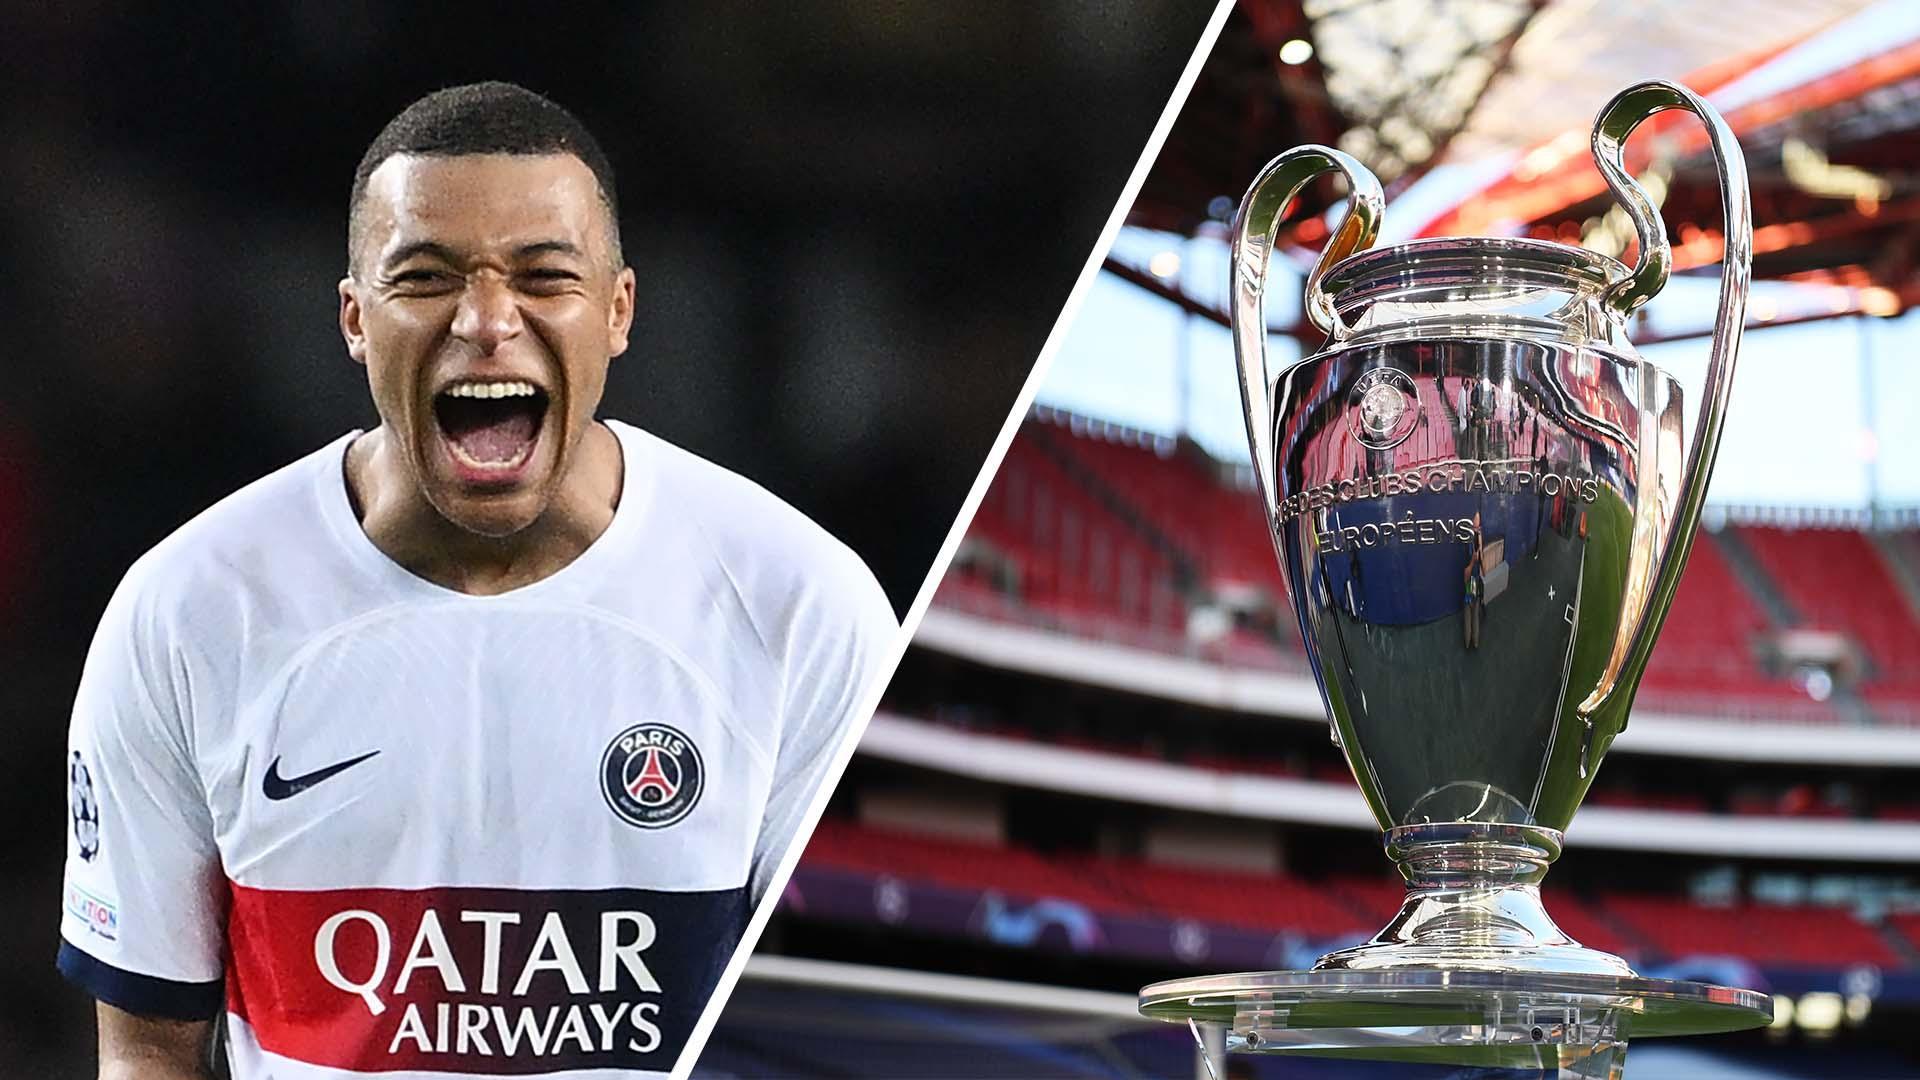 Mbappé: I dream about winning the Champions League with PSG